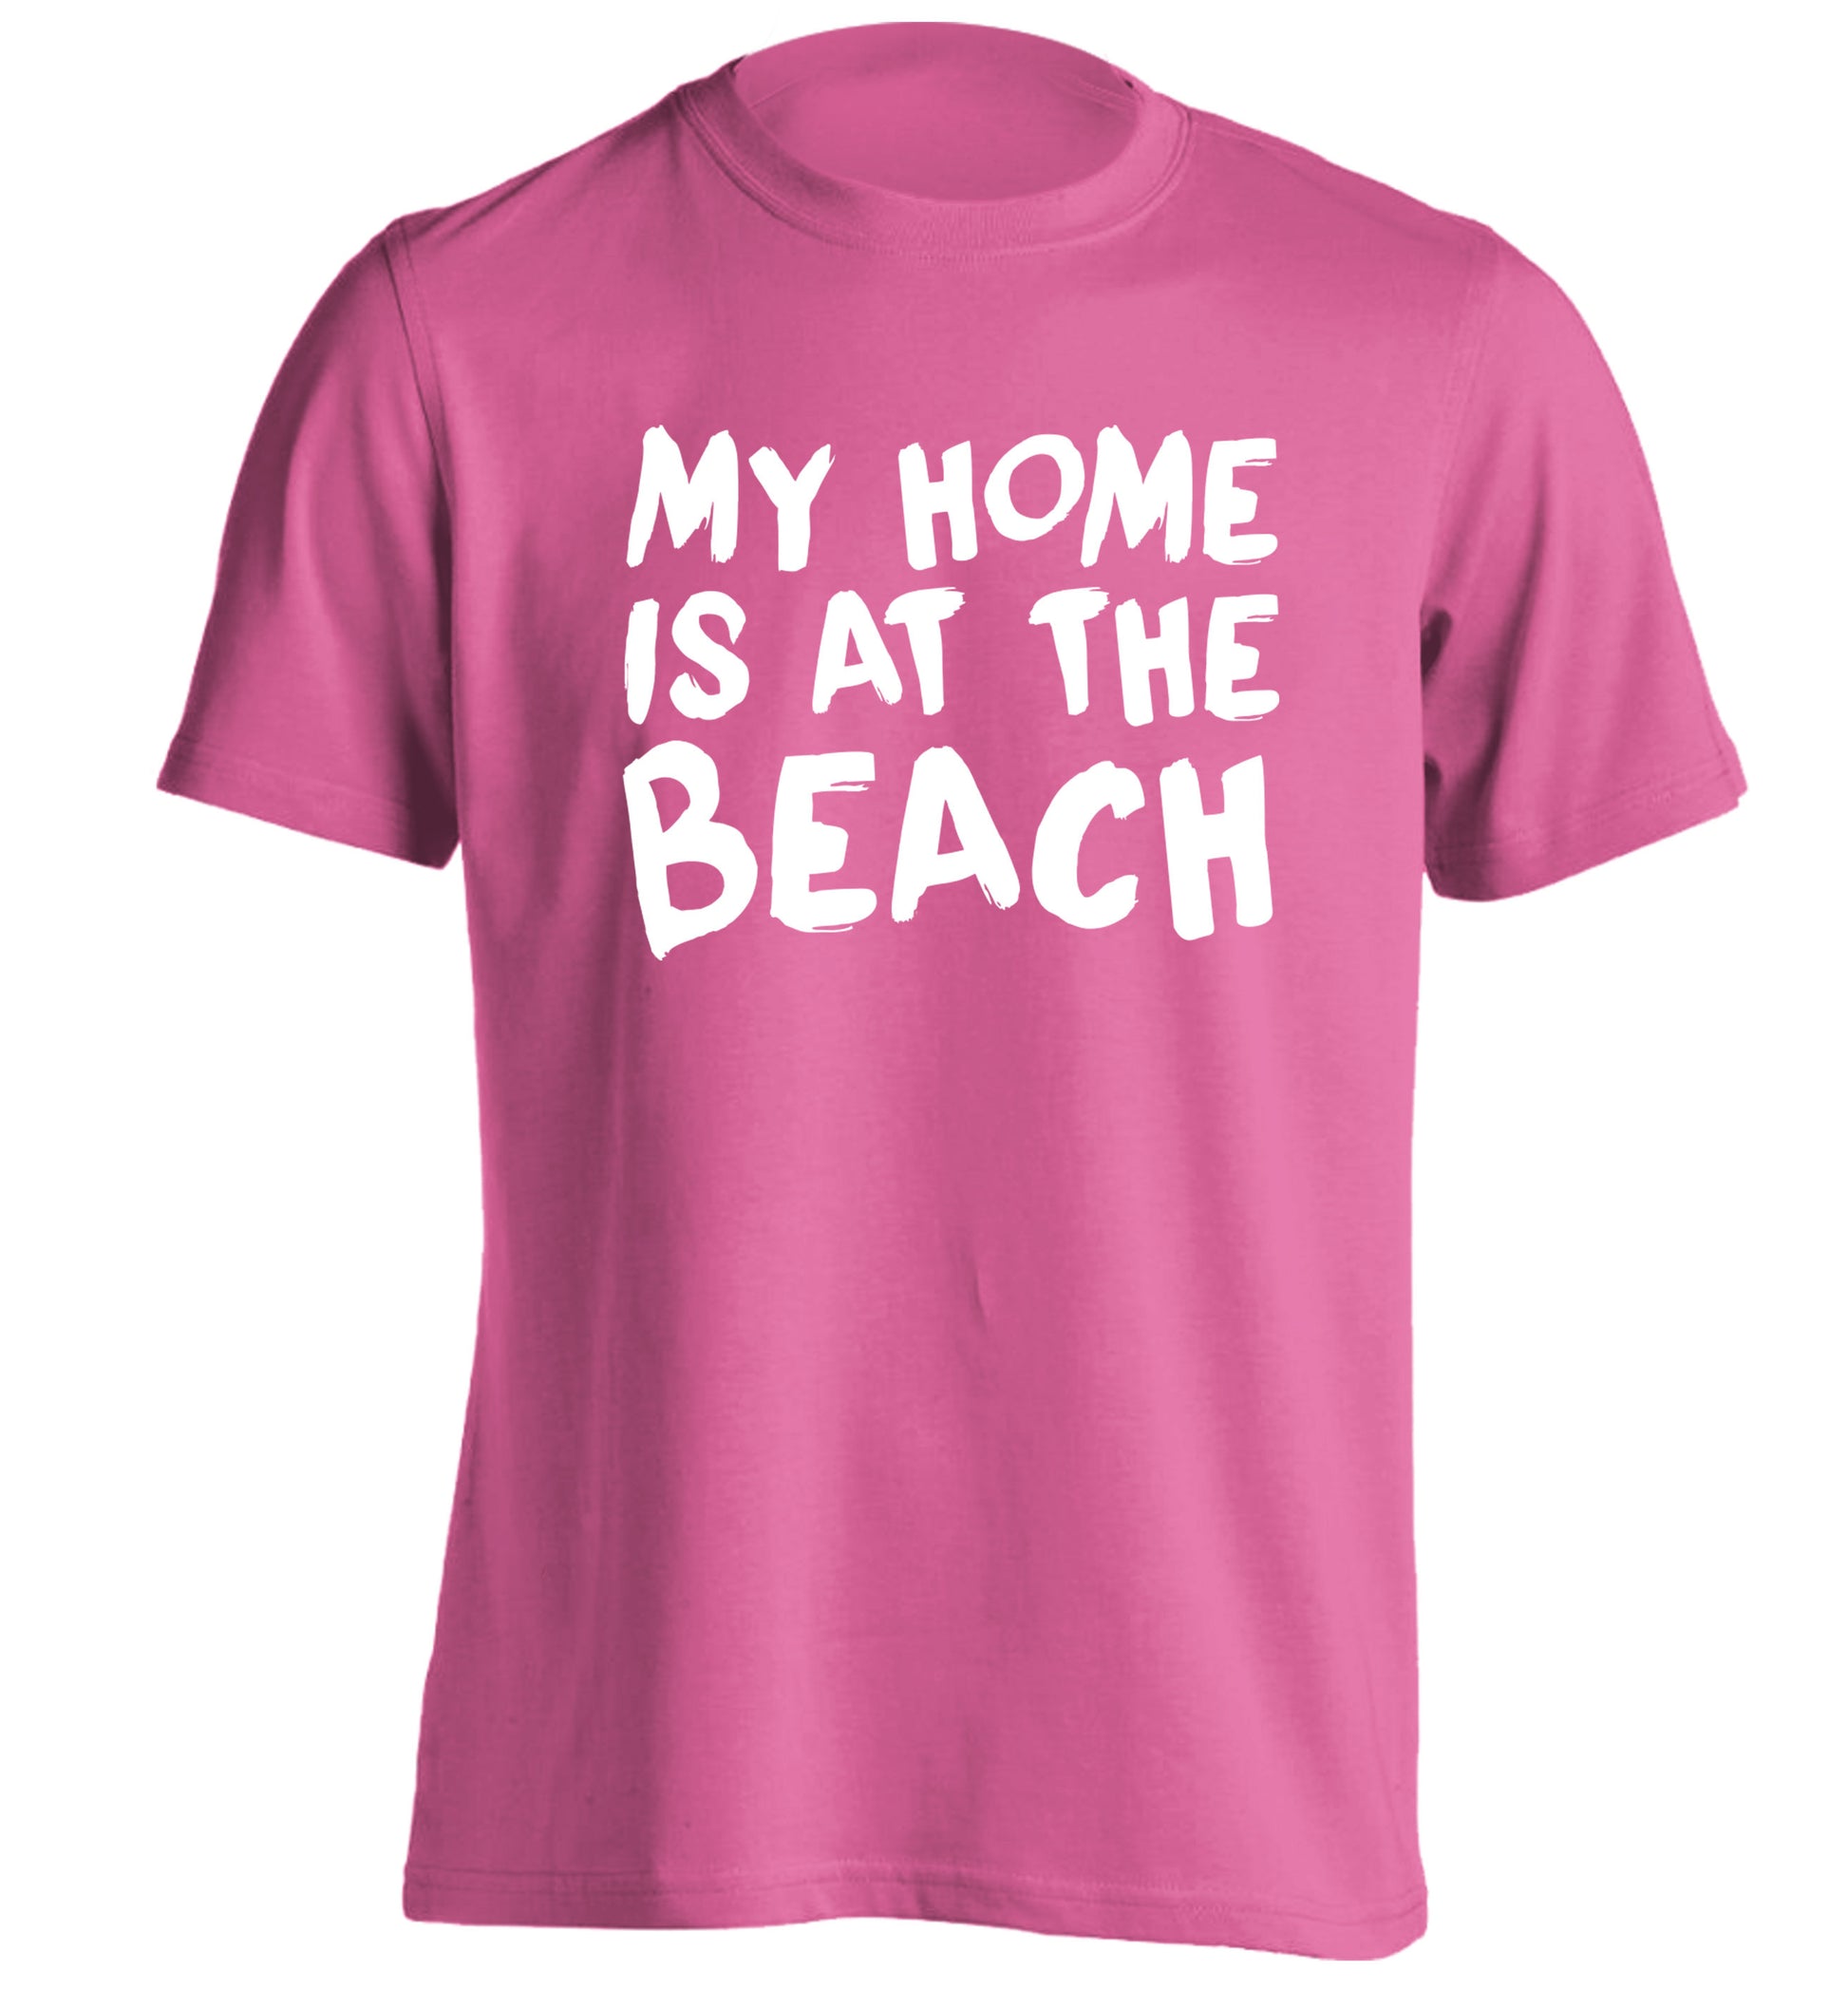 My home is at the beach adults unisex pink Tshirt 2XL